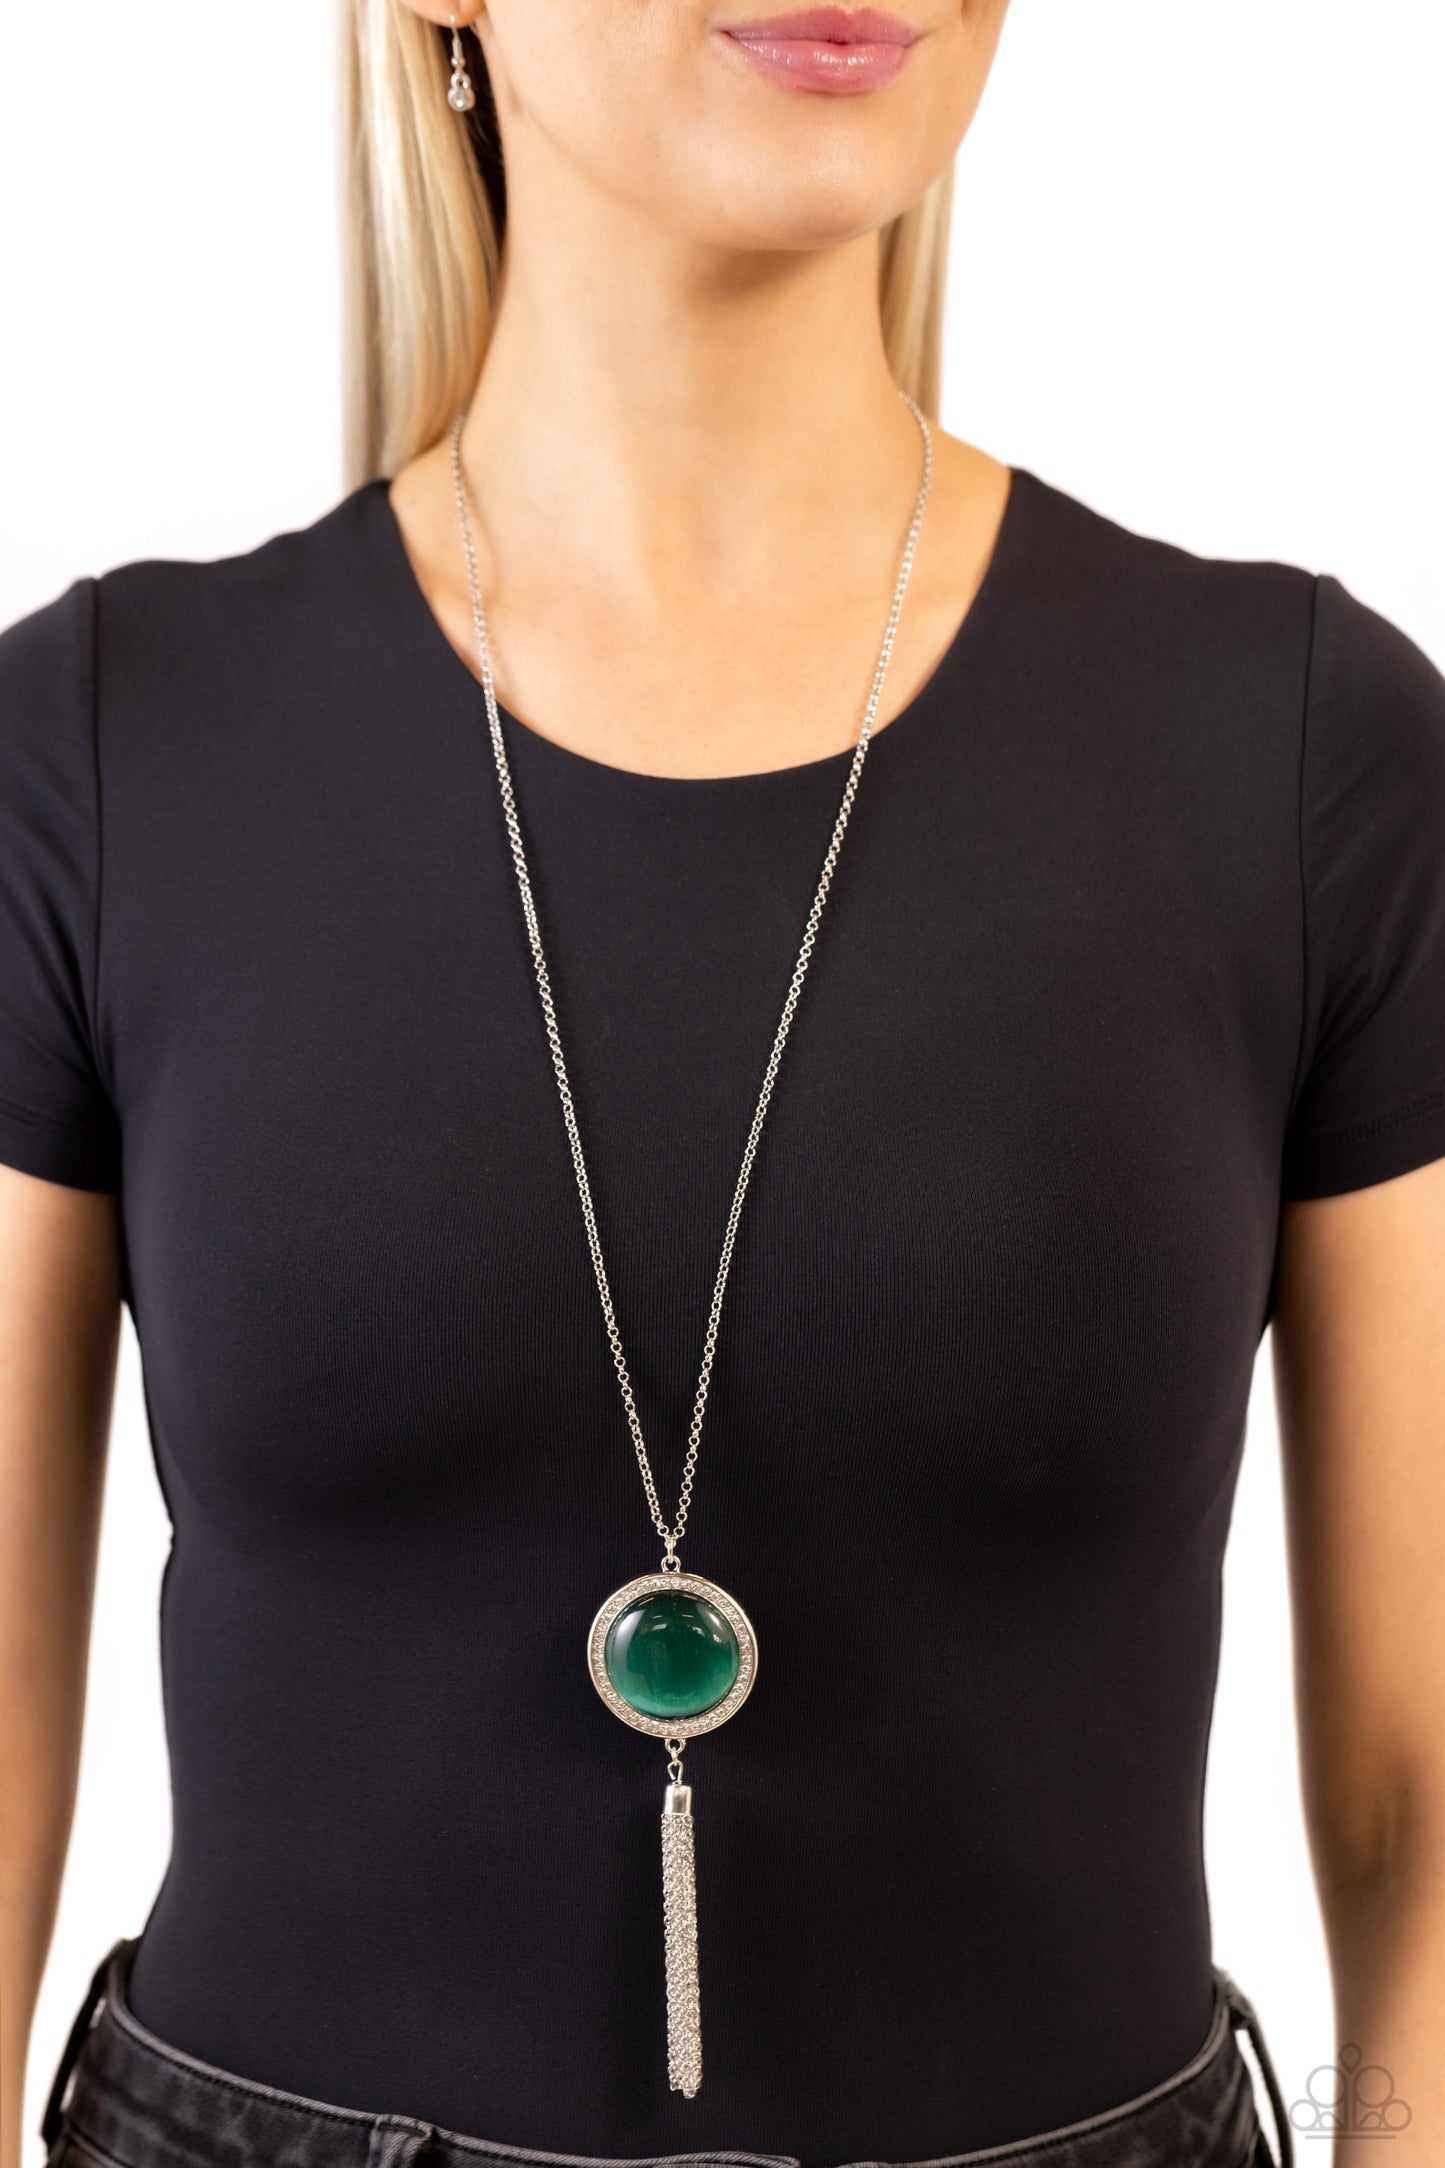 Tallahassee Tassel Paparazzi Accessories Necklace with Earrings - Green